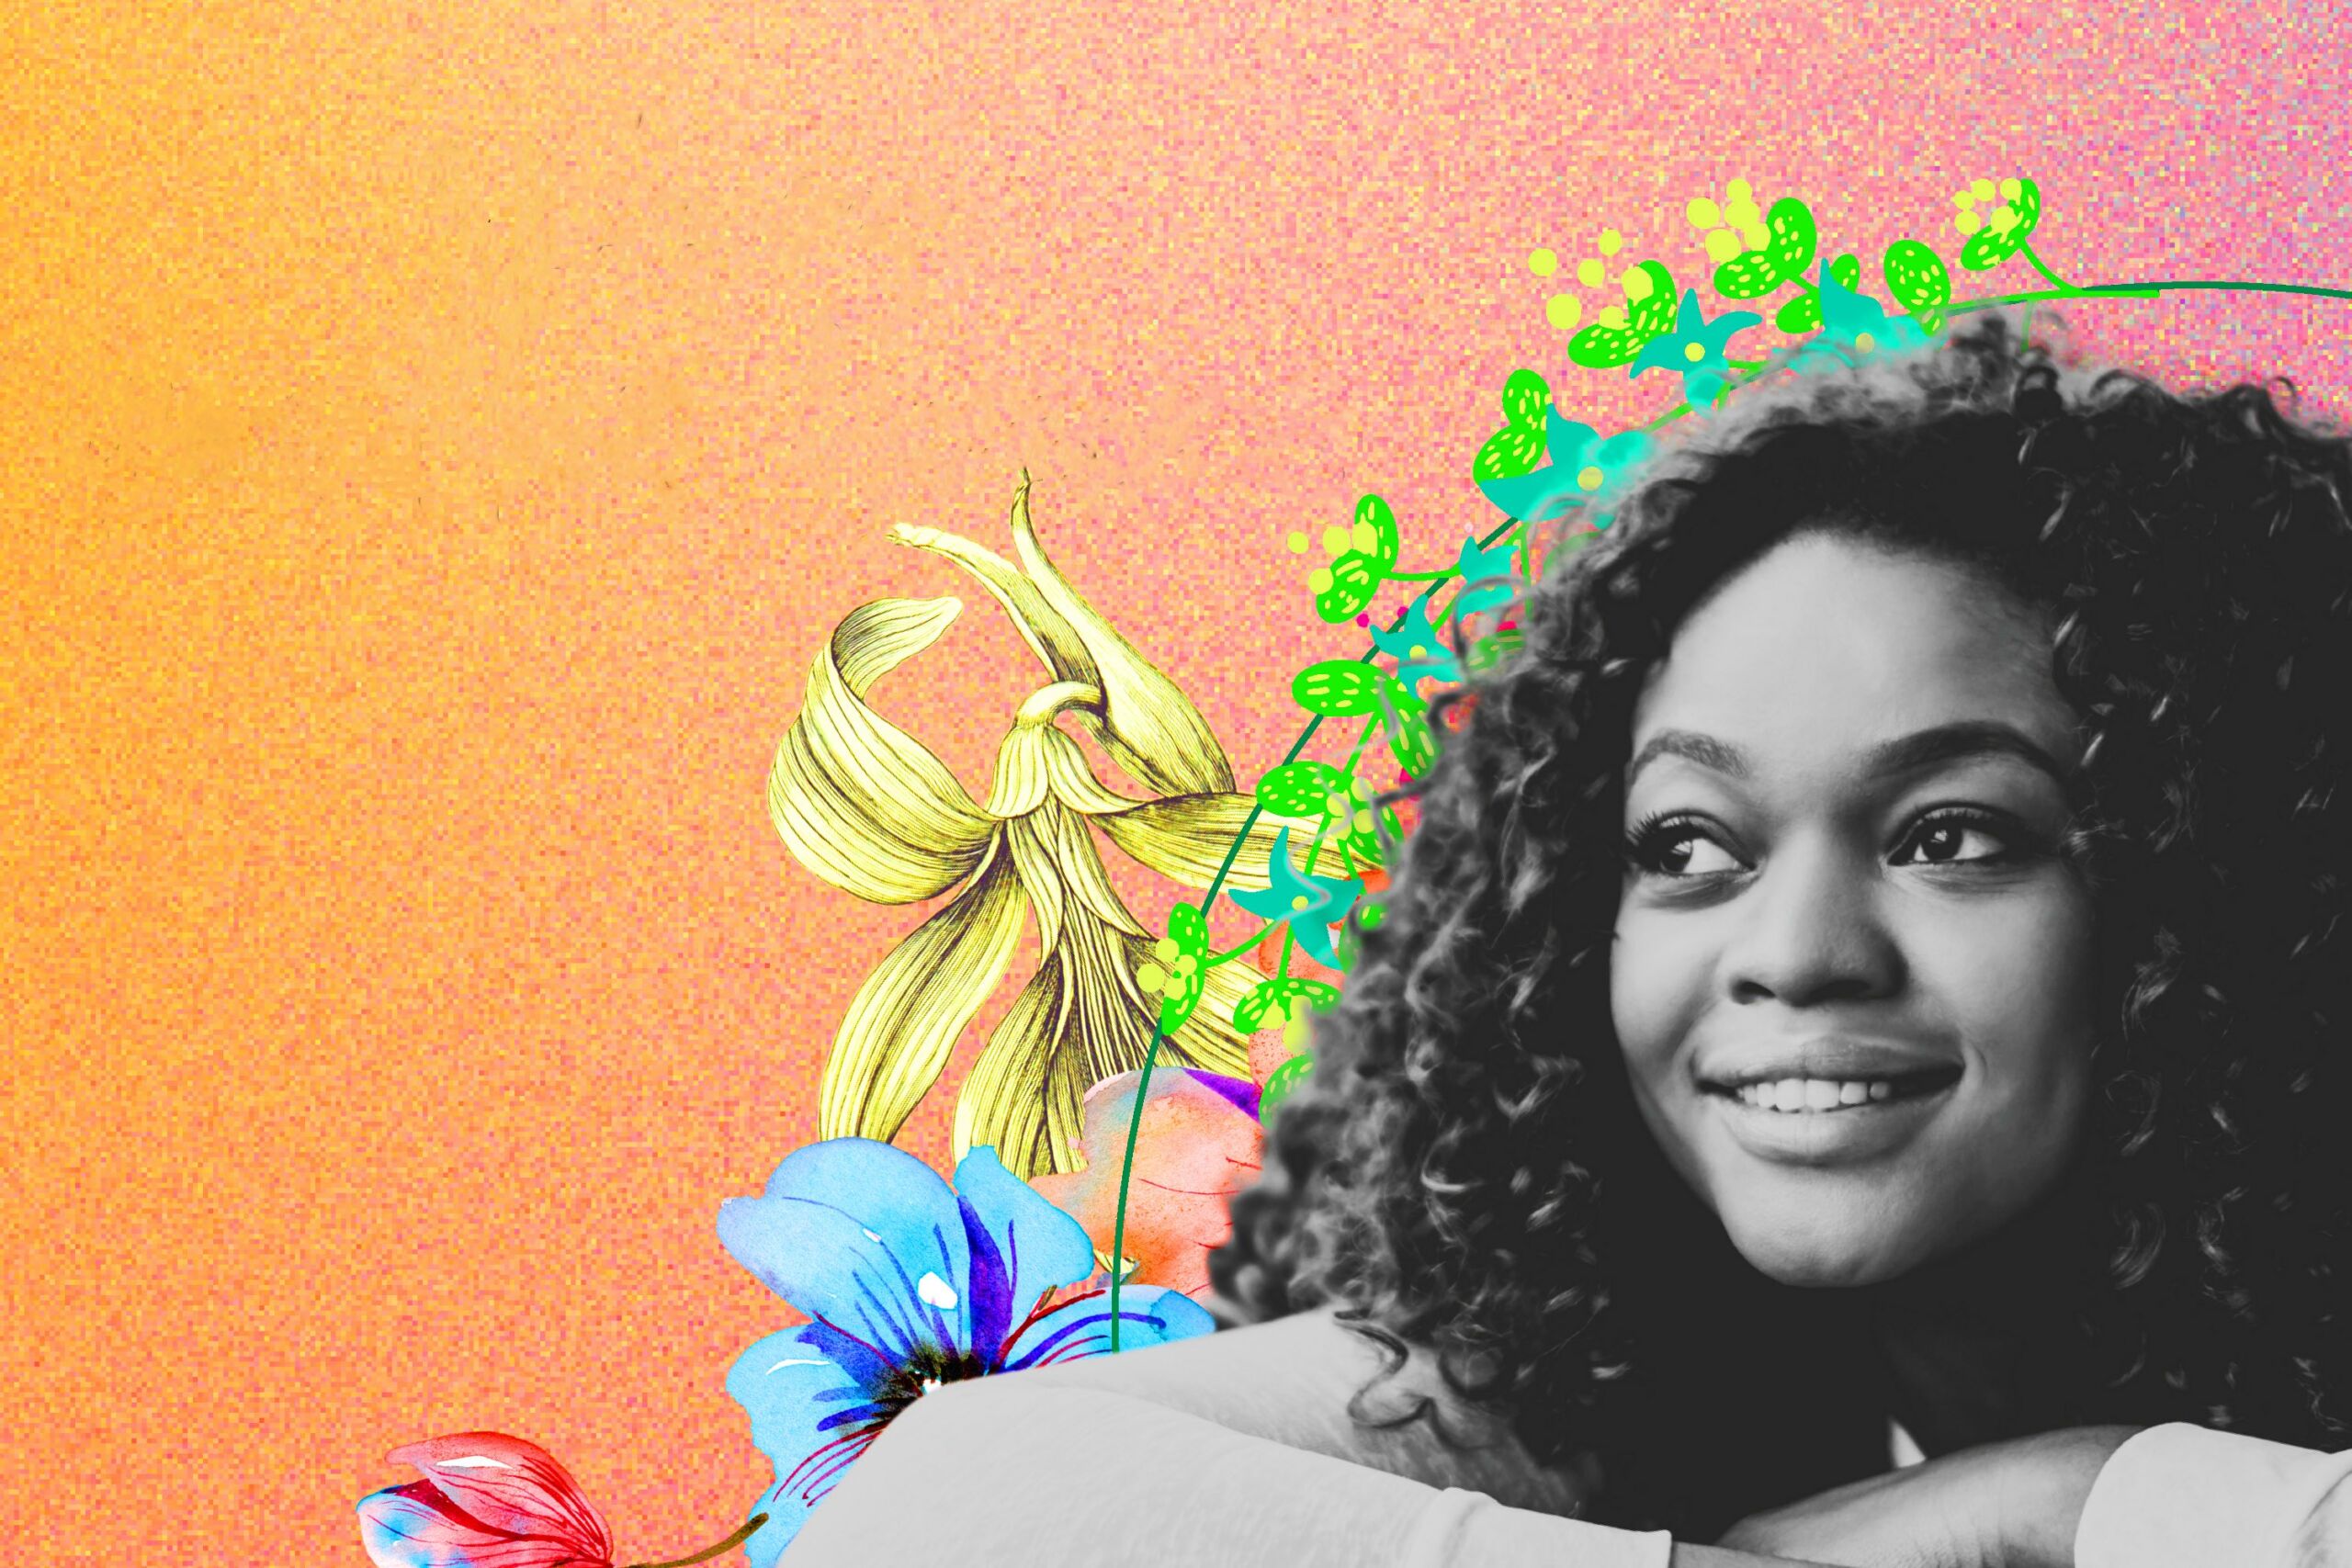 A black girl with curly hair set against a virtual background of flowers and orange